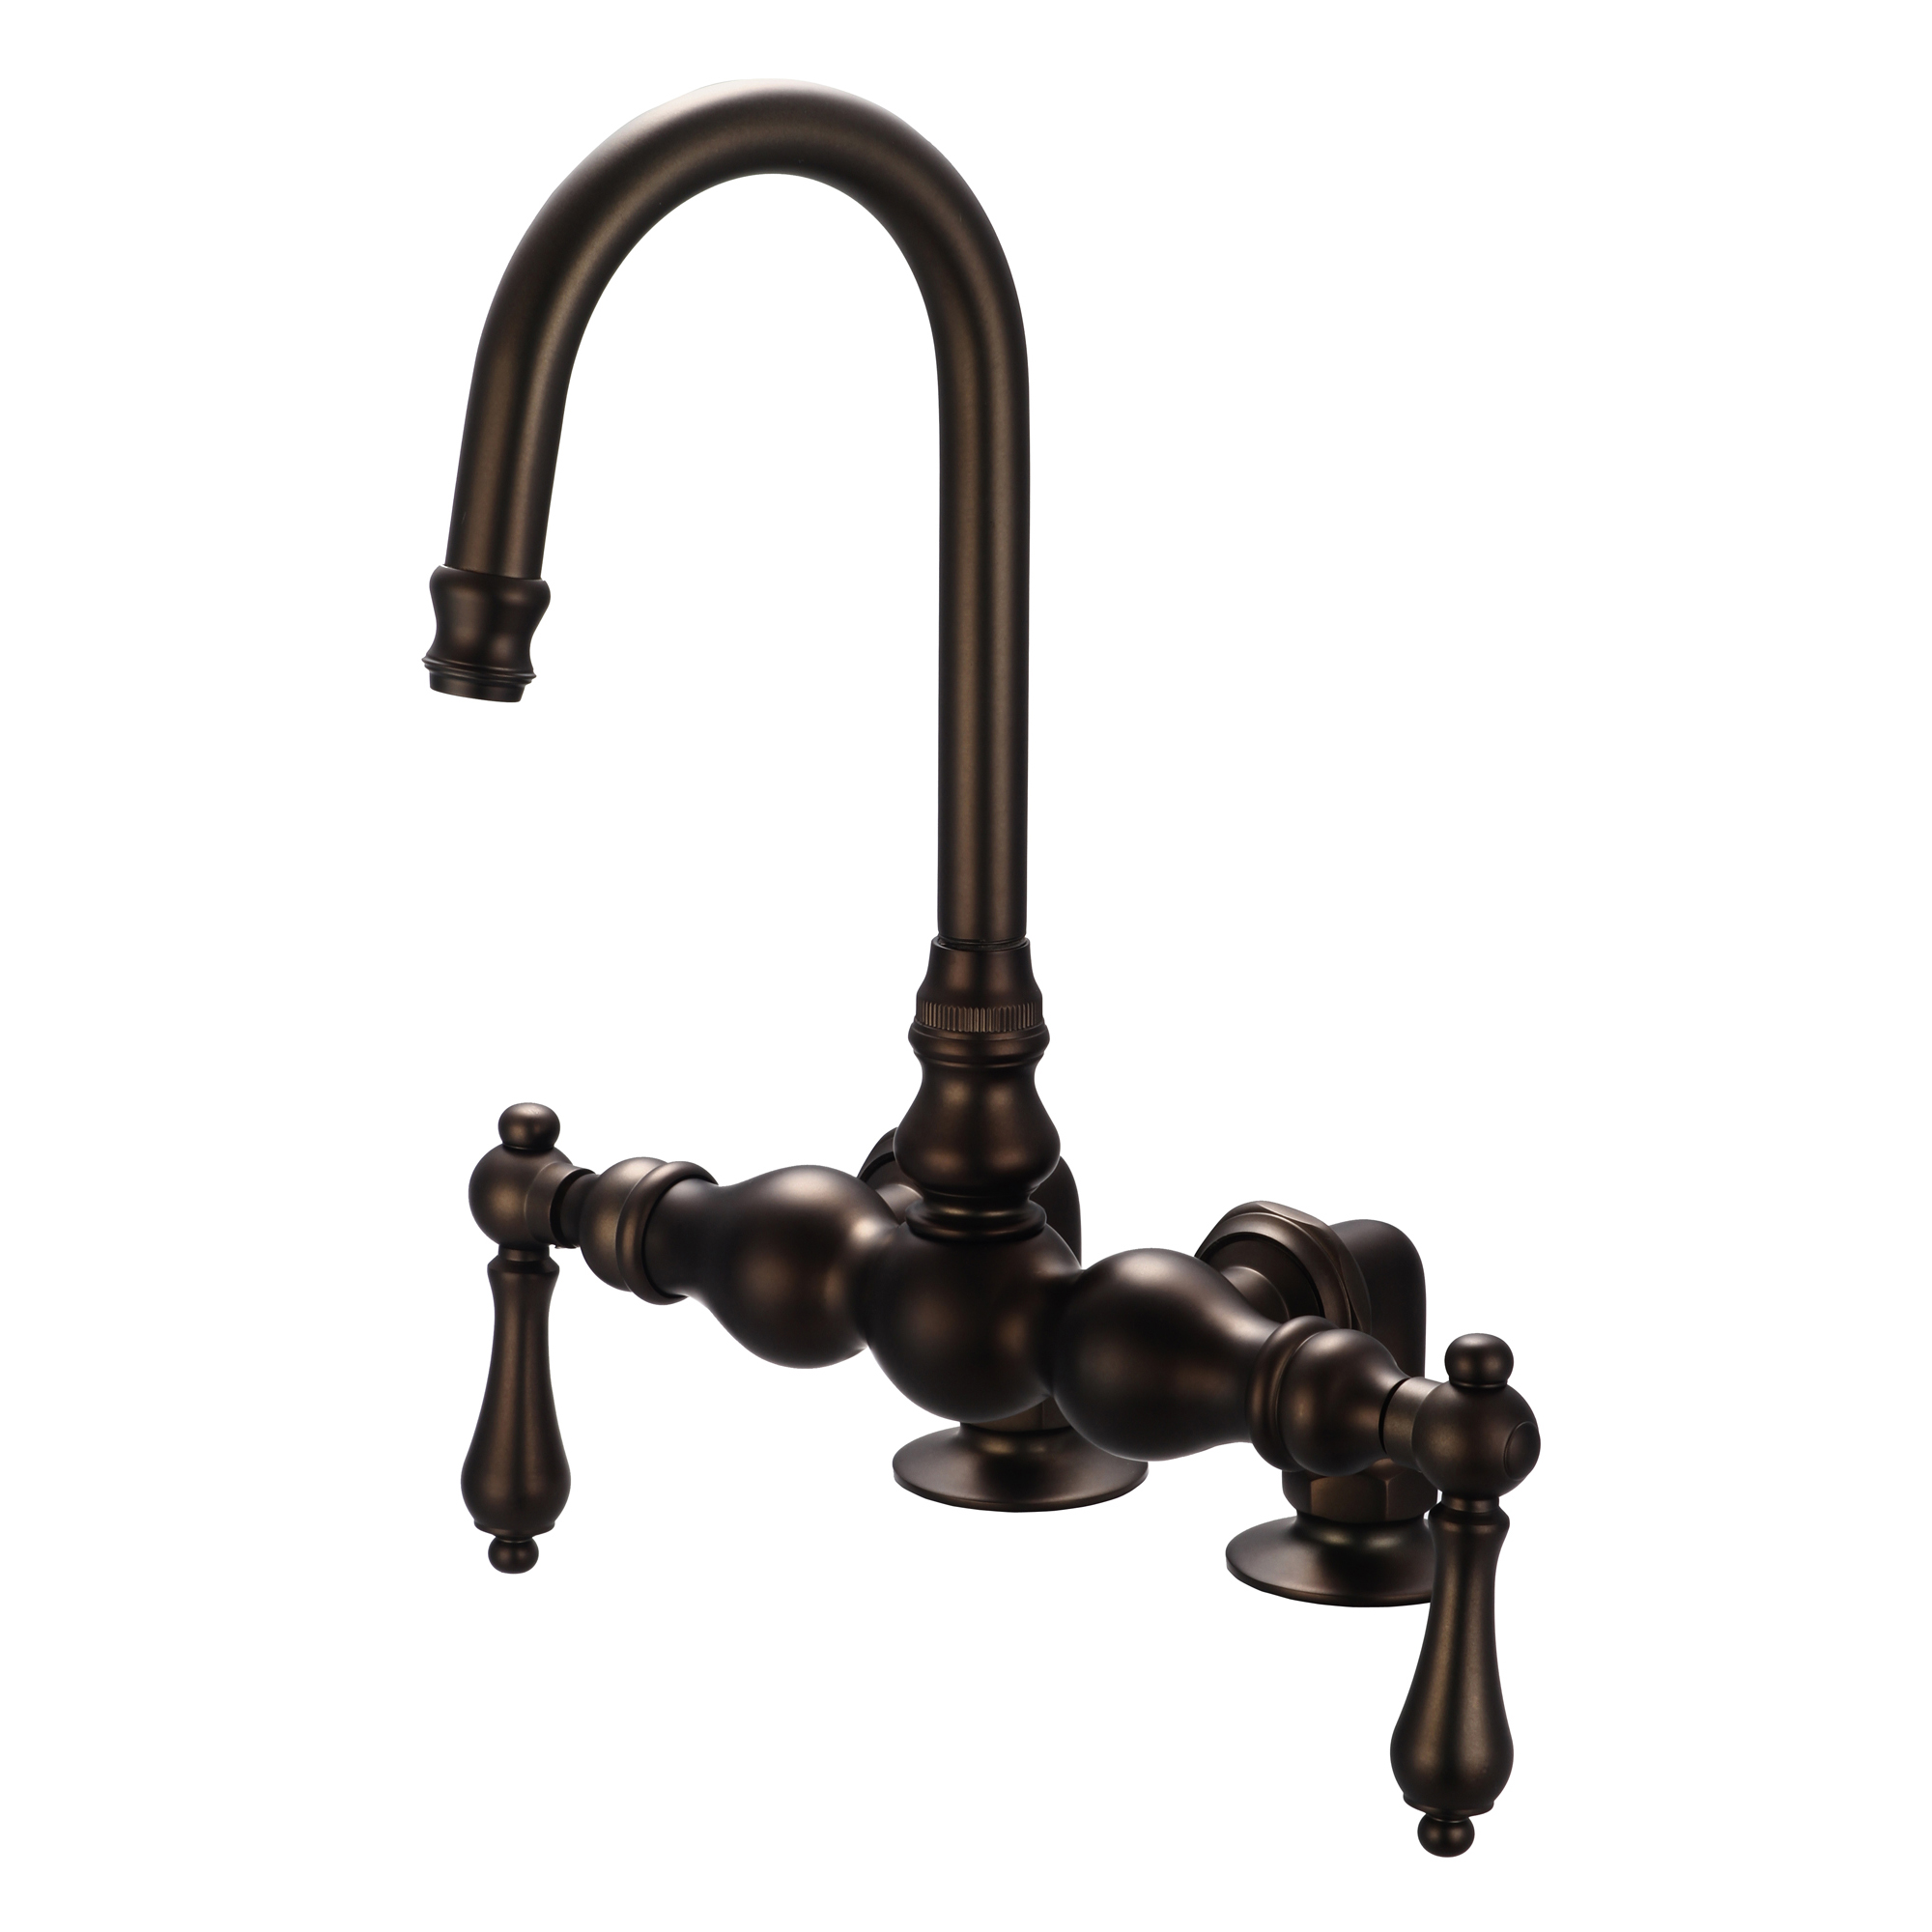 Vintage Classic 3.375 Inch Center Deck Mount Tub Faucet With Gooseneck Spout & 2 Inch Risers in Oil-rubbed Bronze Finish Finish With Metal Lever Handles Without Labels